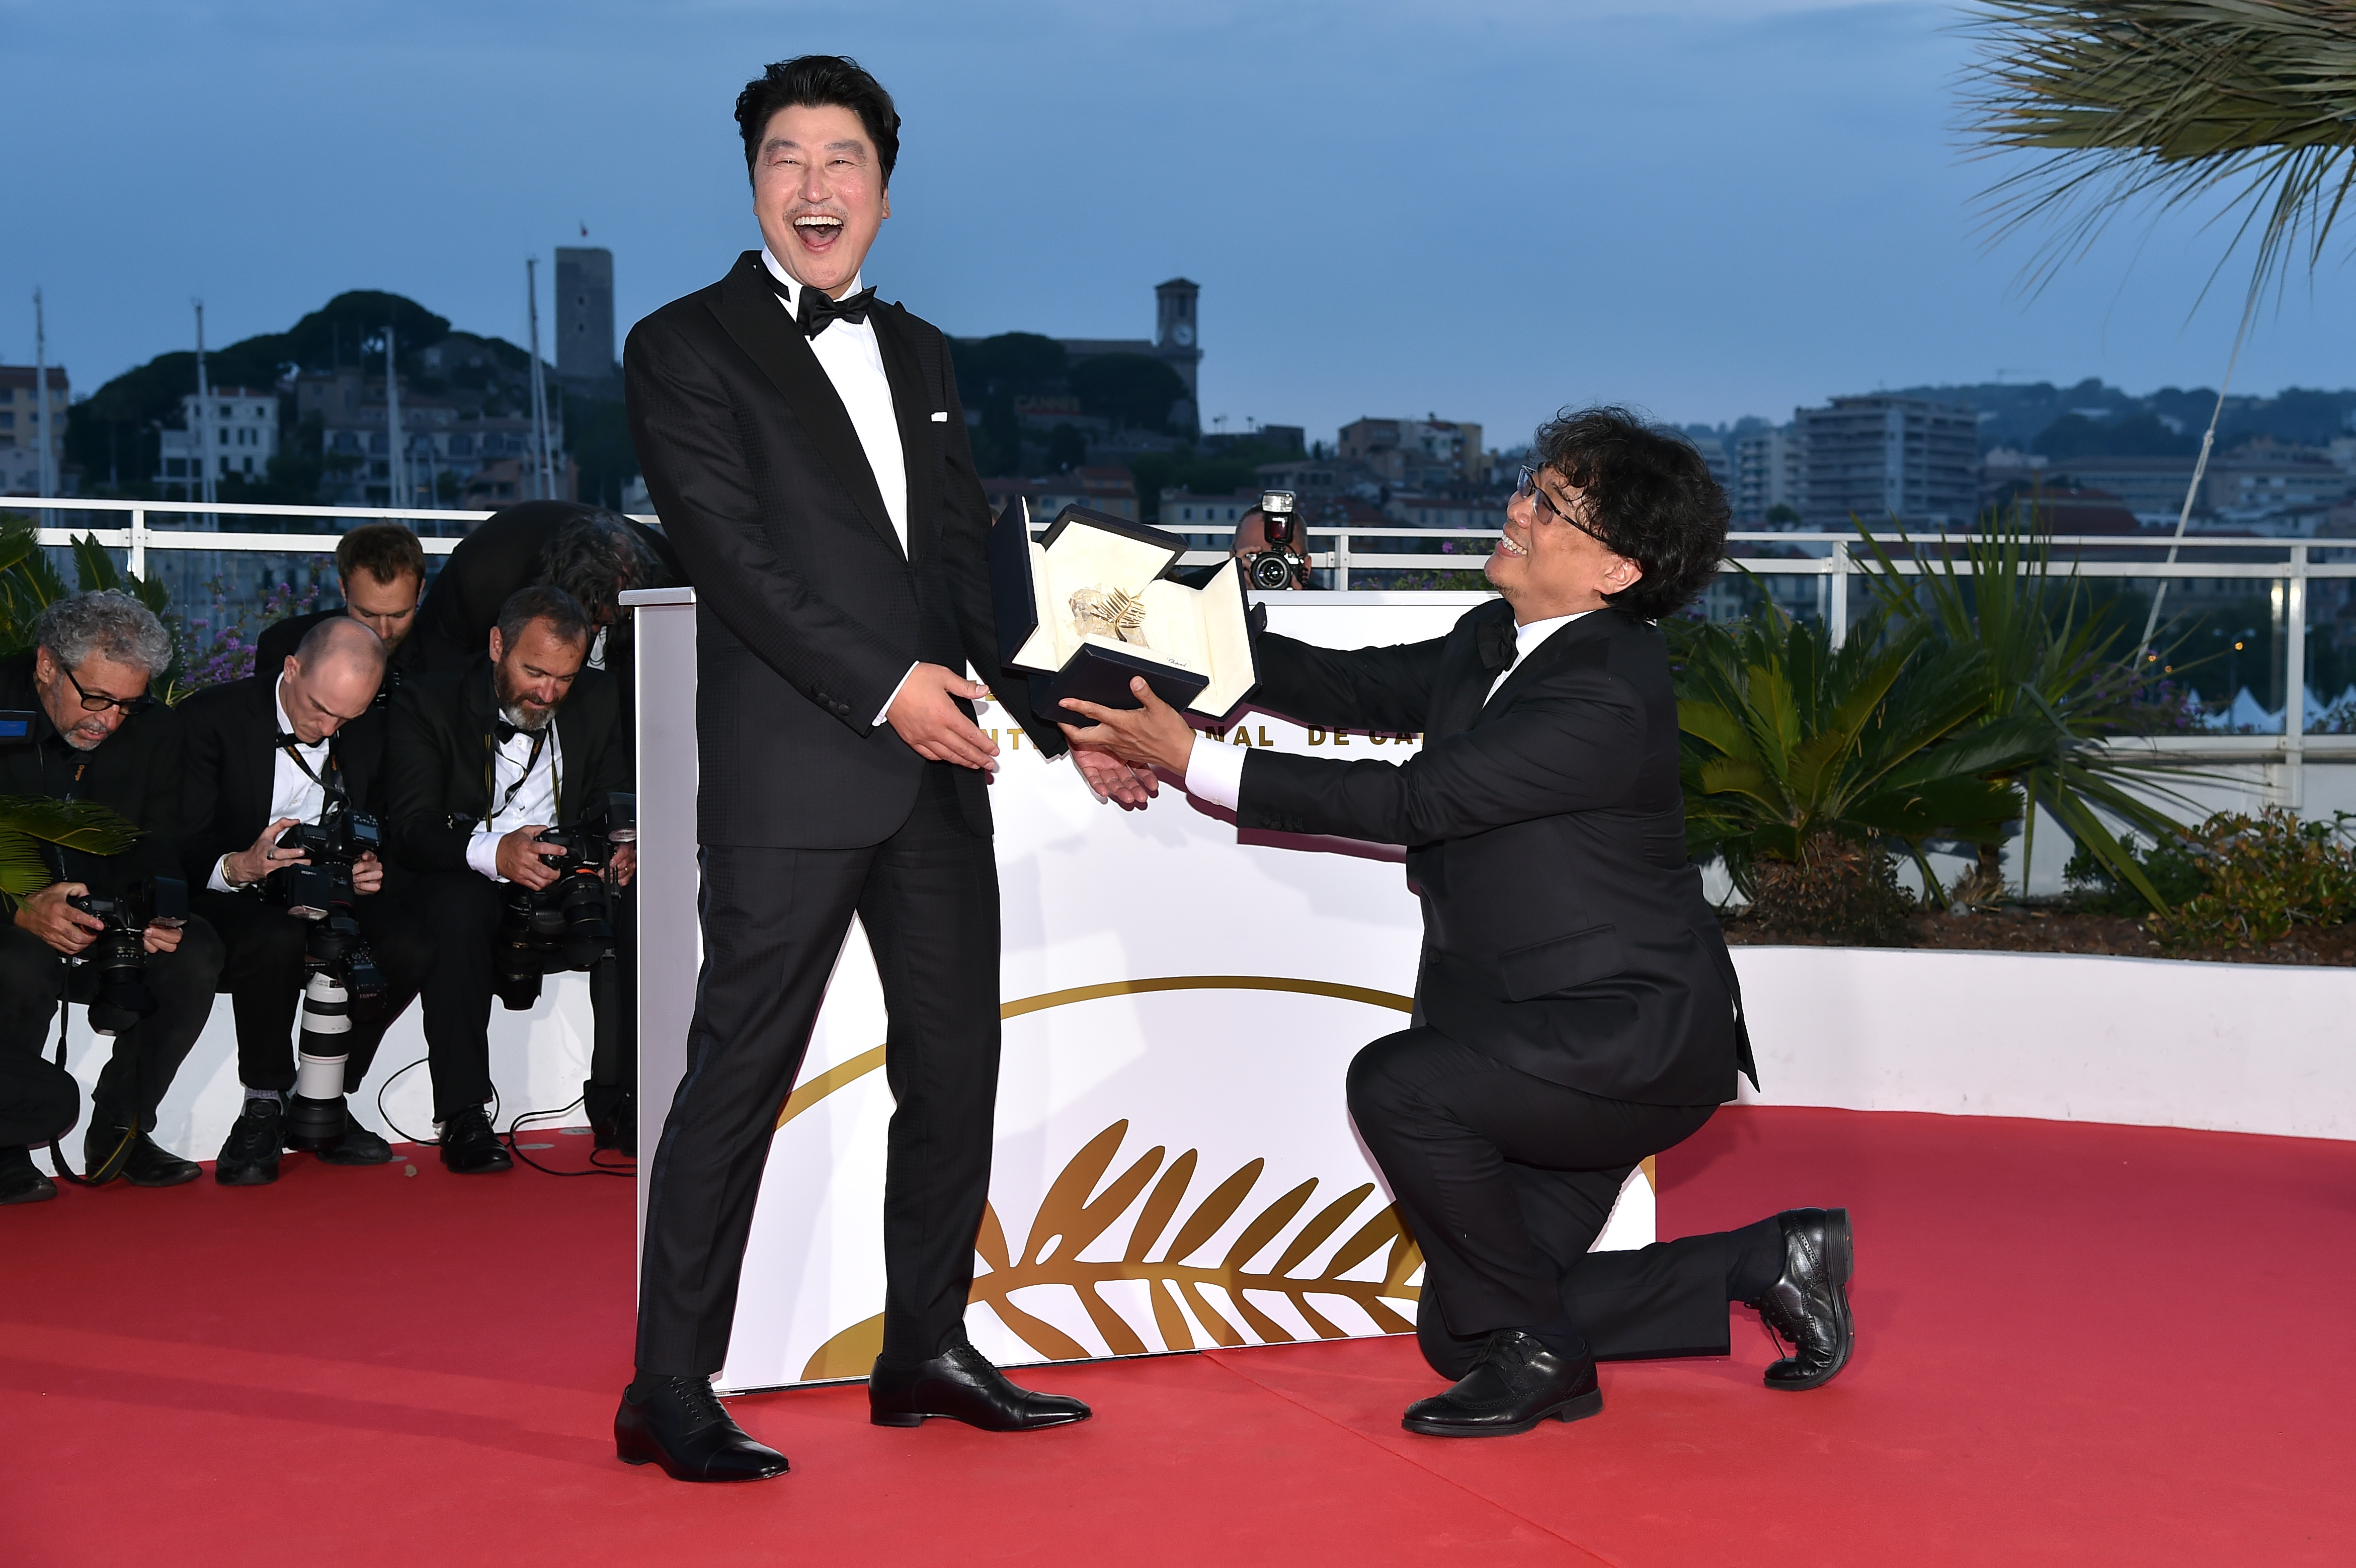 Director Bong Joon-Ho, presents the Palme d'Or award for his film "Parasite" to Kang-Ho Song. (Photo by Dominique Charriau/WireImage)